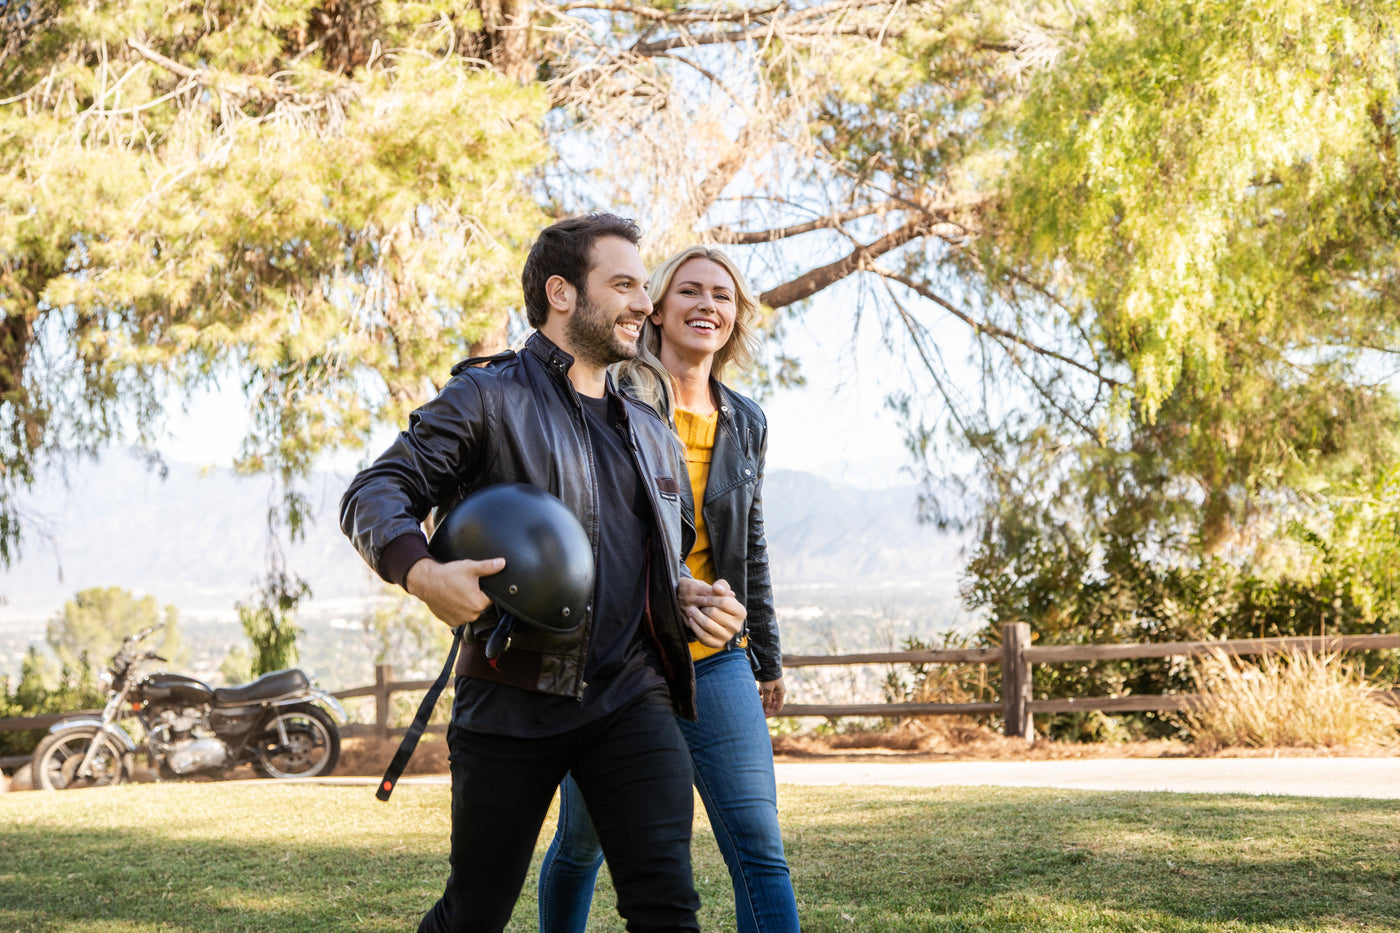 Bosley Results After Photo Man and Woman Smiling with Motorcycle and Cityscape Background